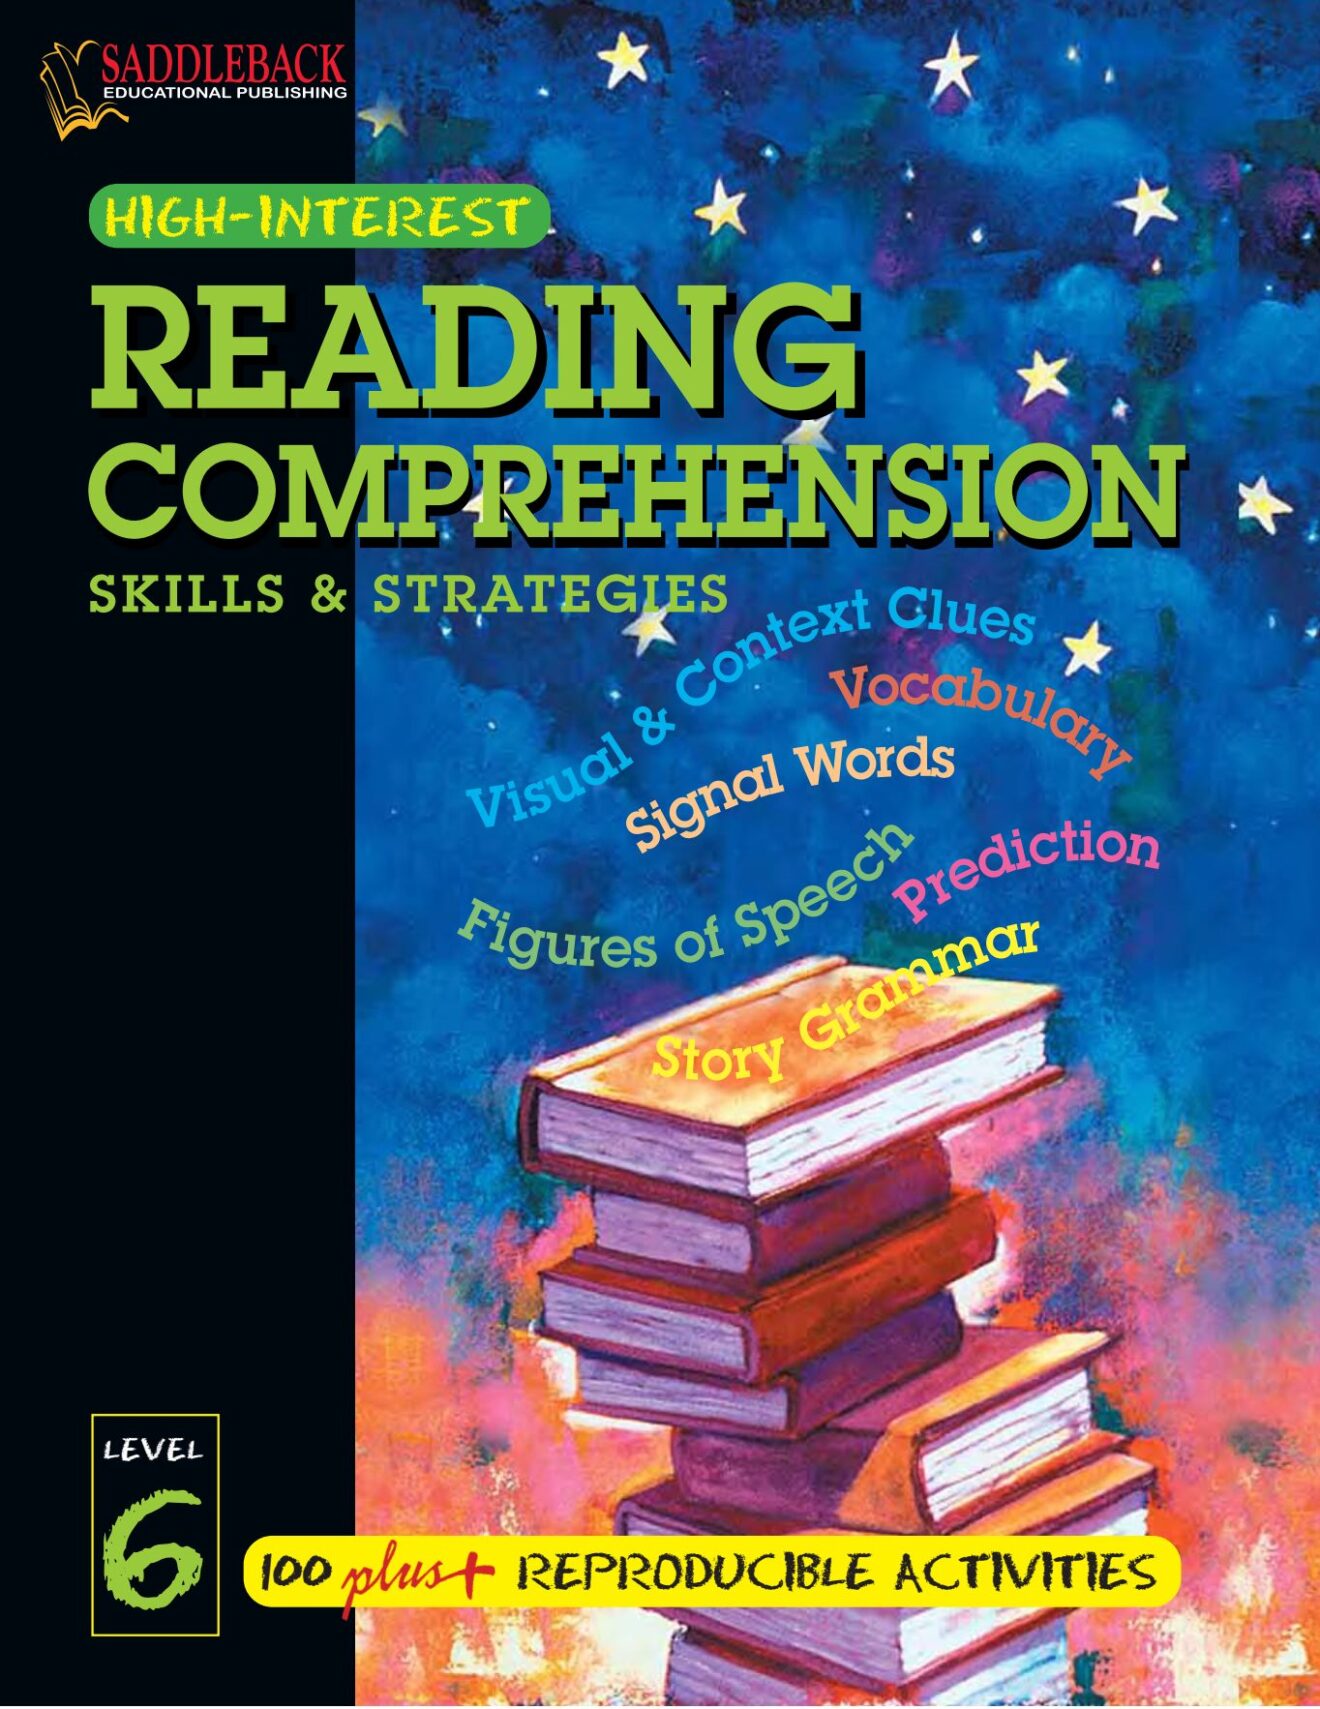 Free Reading Comprehension Passages For 6th Grade